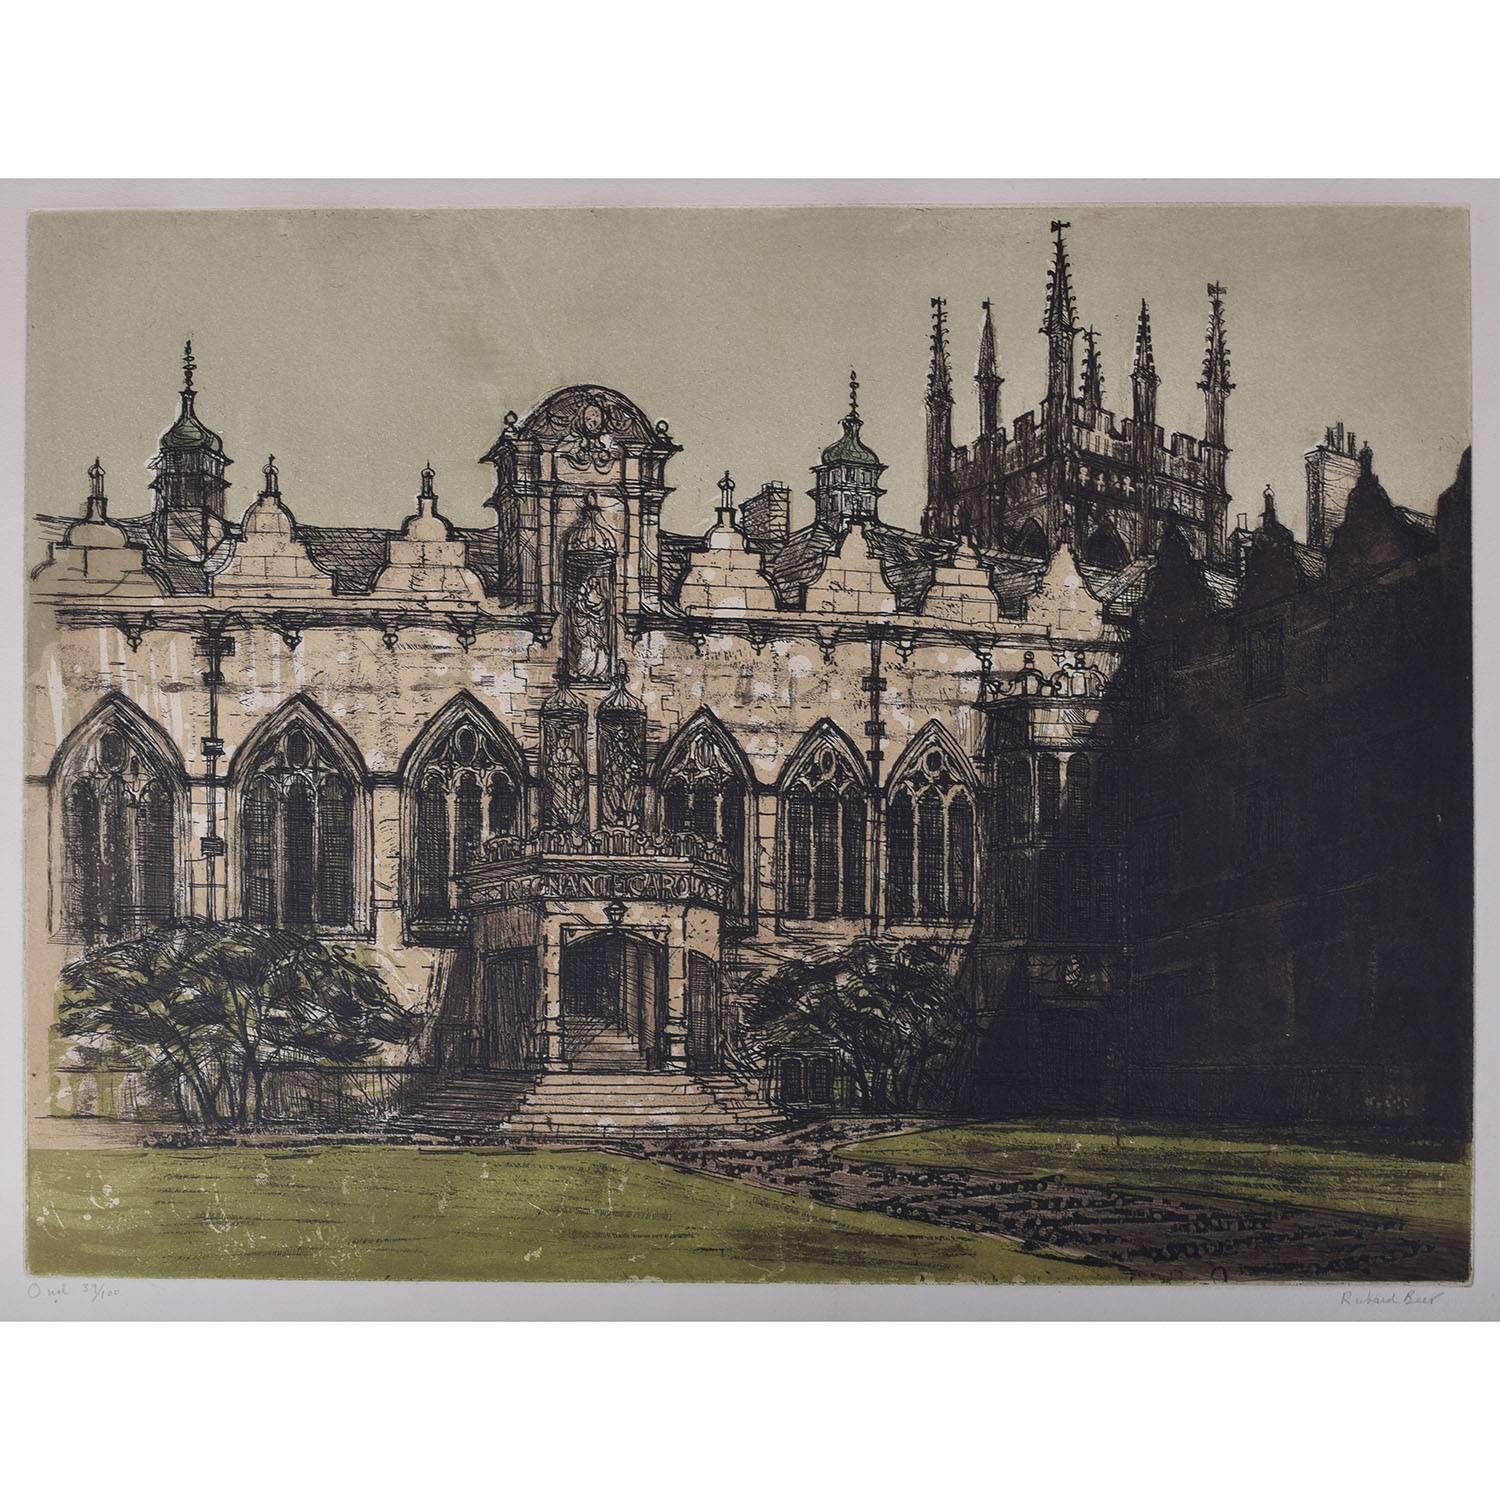 To see our other views of Oxford and Cambridge, scroll down to "More from this Seller" and below it click on "See all from this Seller" - or send us a message if you cannot find the view you want.

Richard Beer (1928 - 2017)
Oriel College,